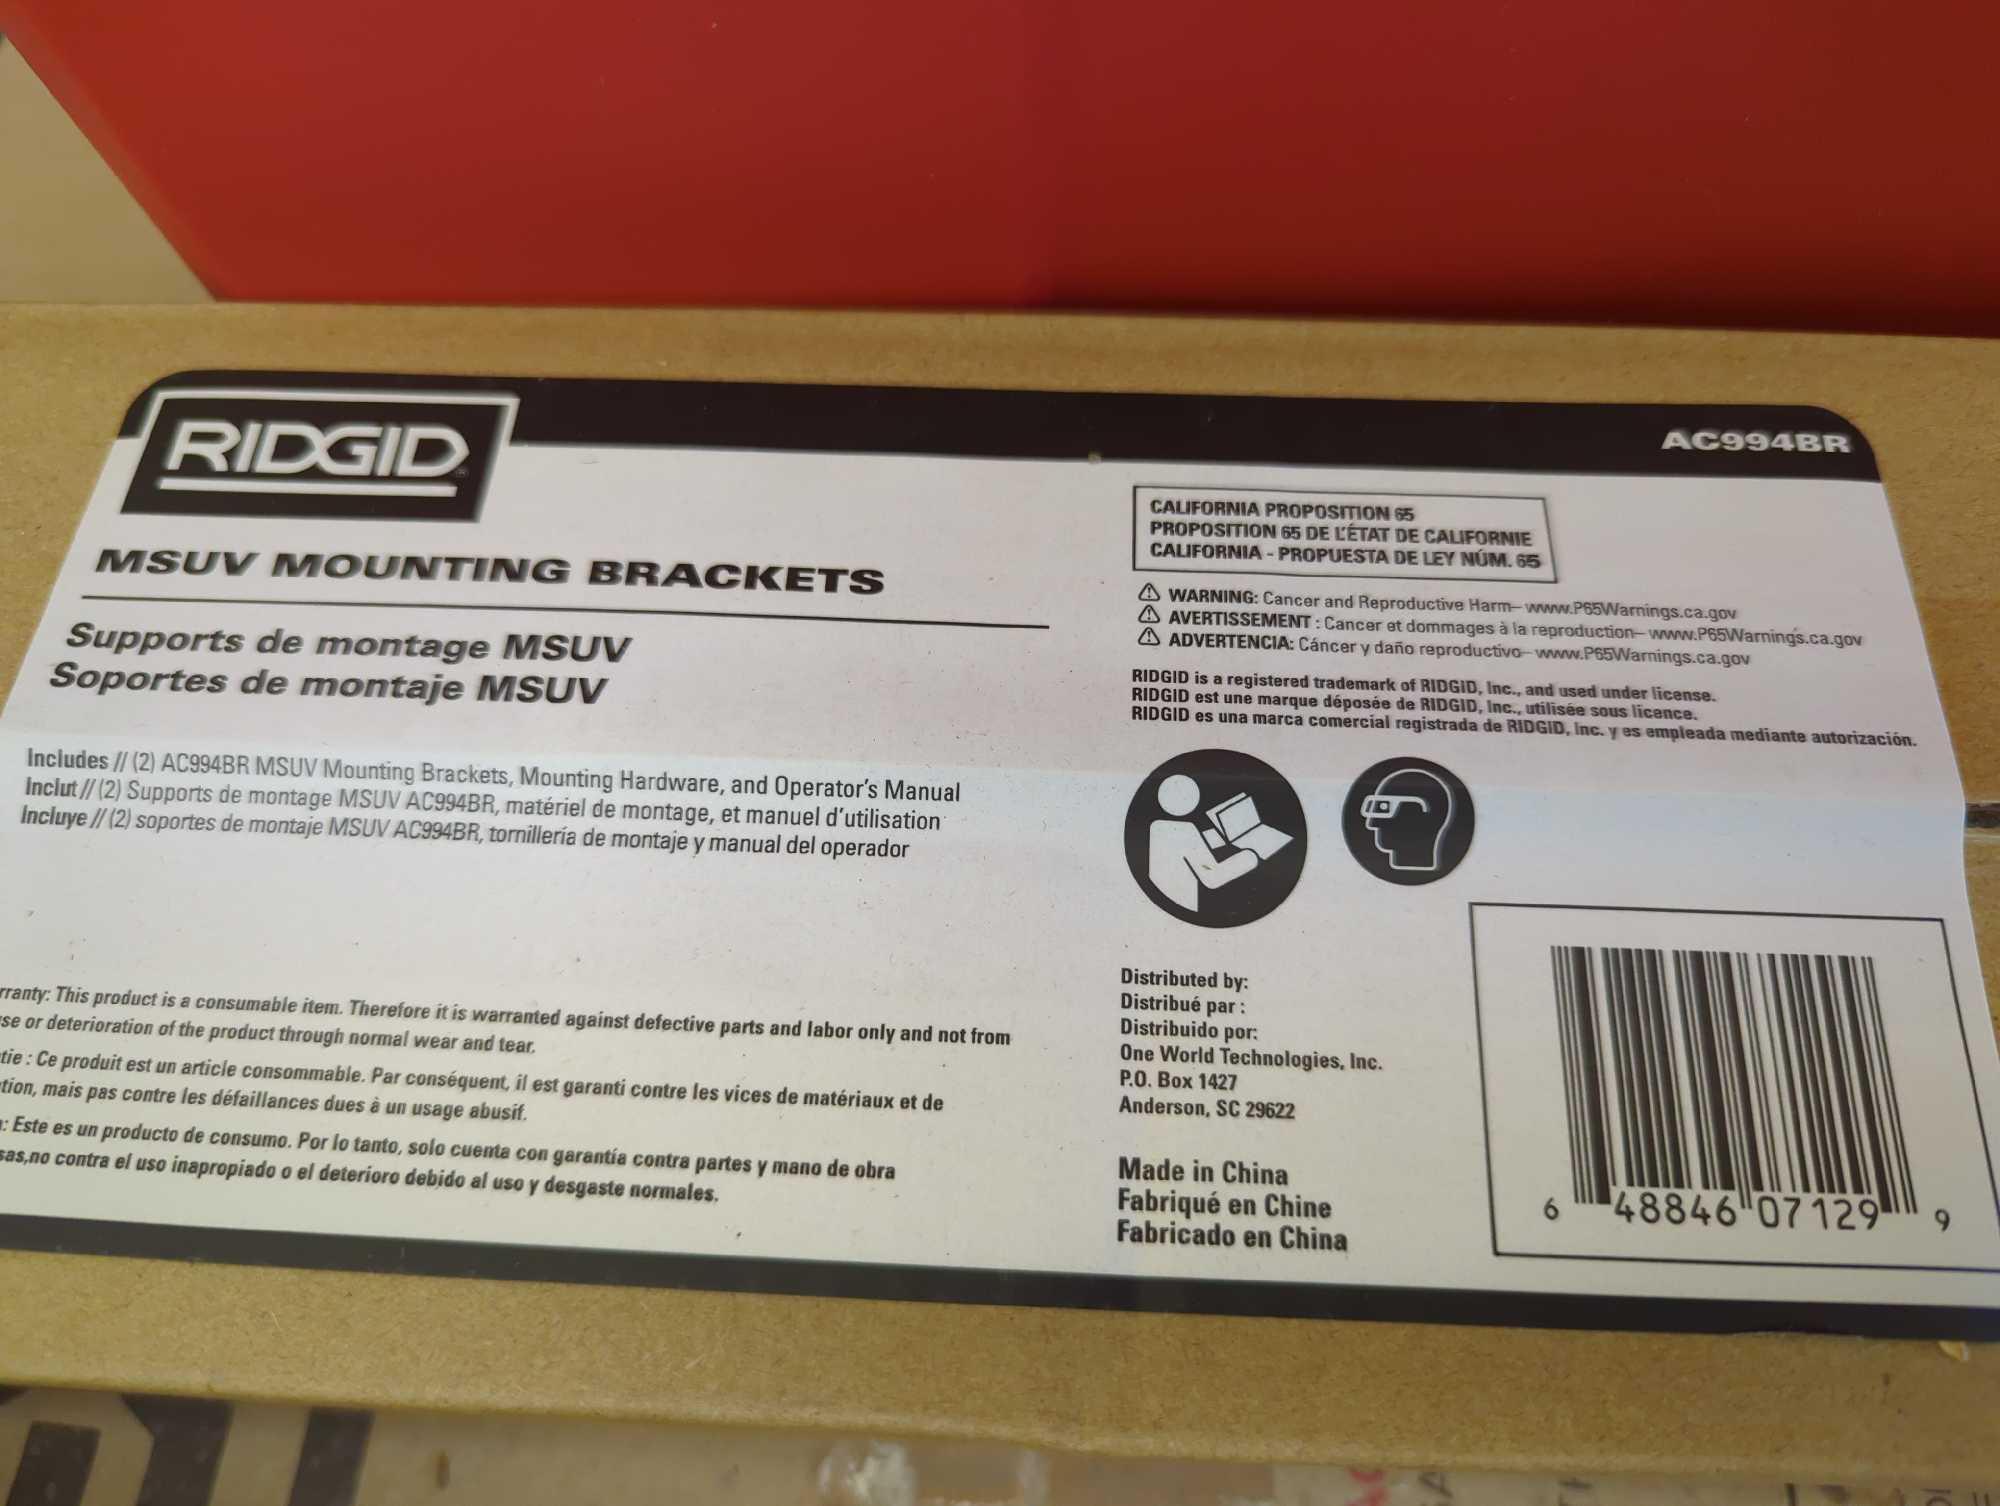 RIDGID Mounting Brackets for Universal Mobile Miter Saw Stand AC9946, Appears to be New in Factory